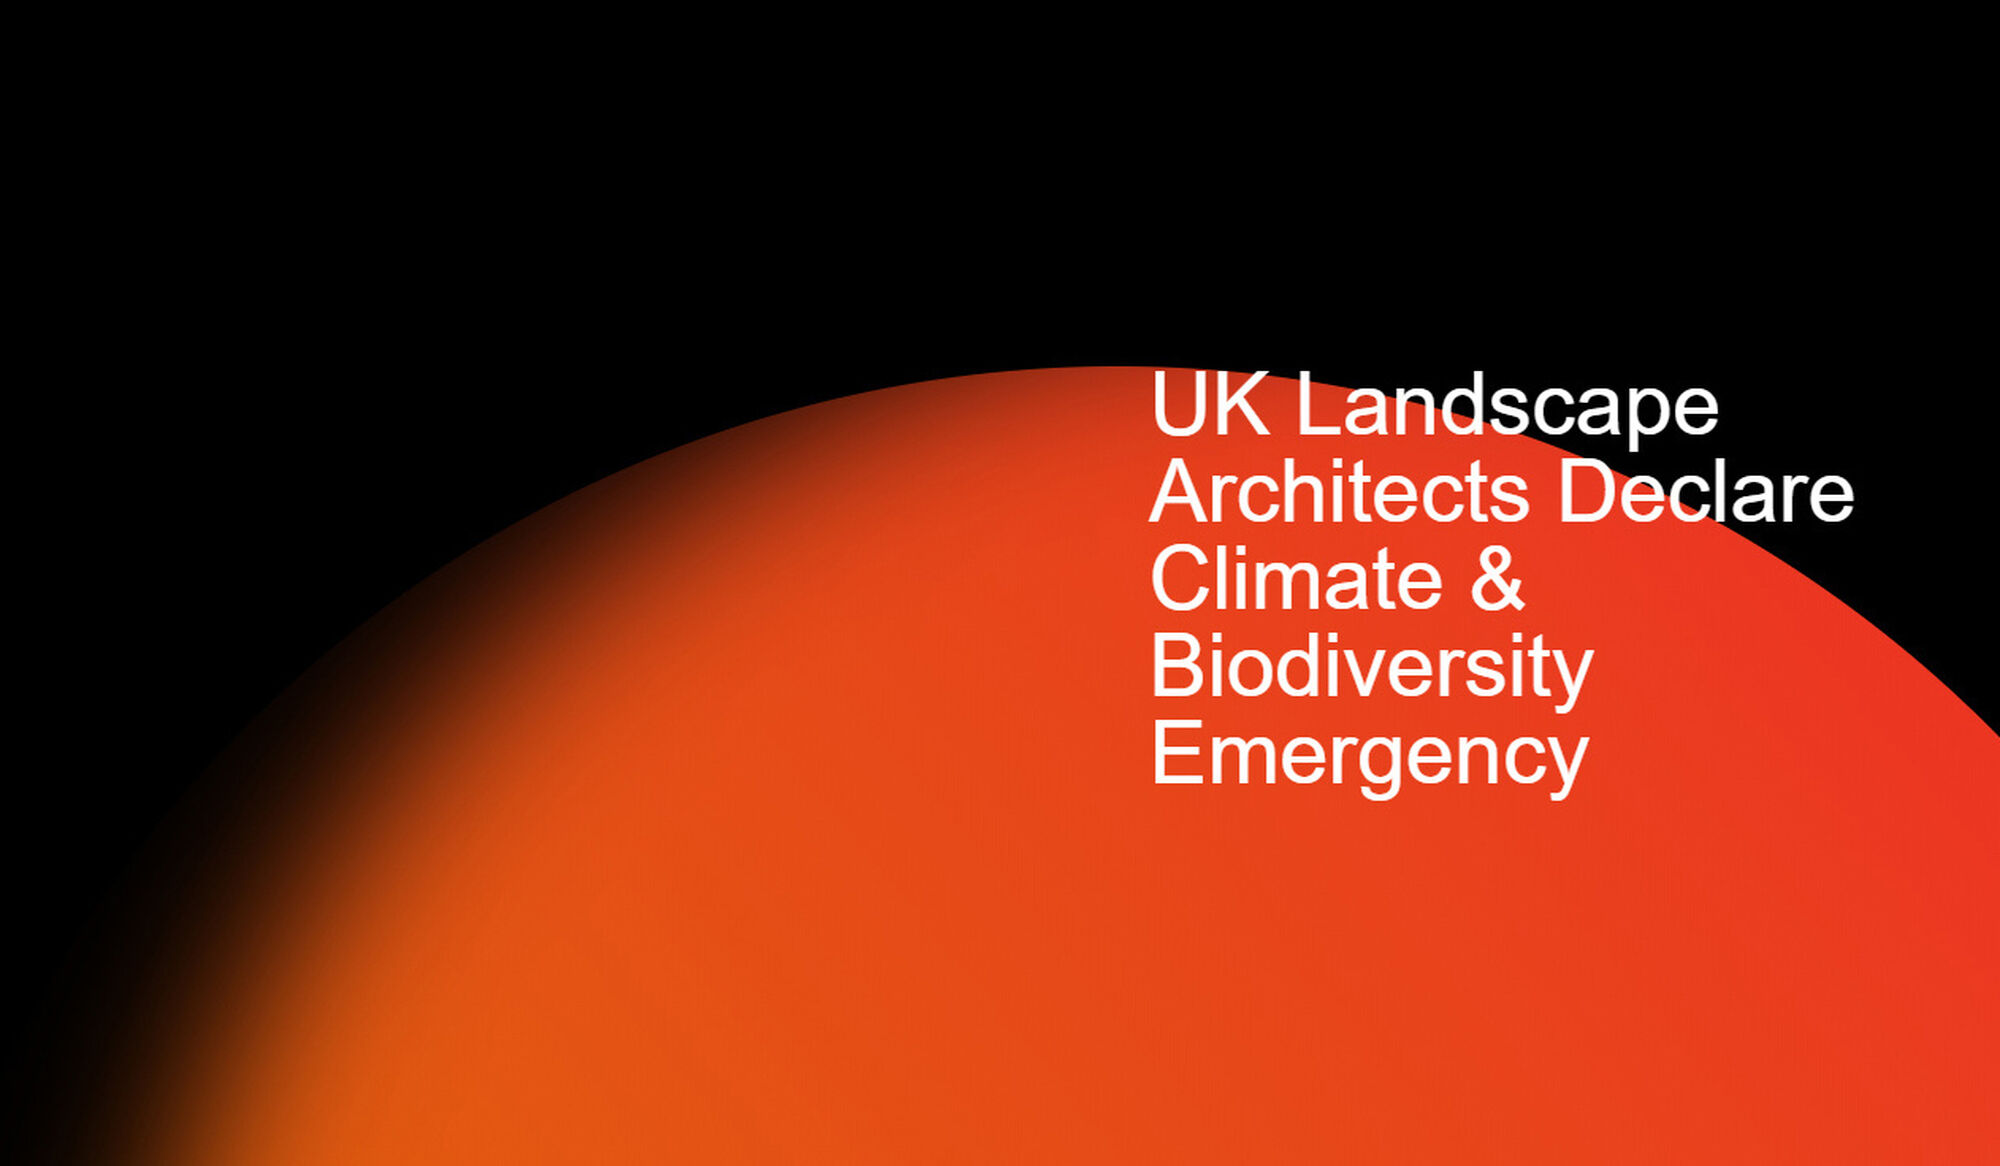 UK Landscape Architects Declare: Looking to the future